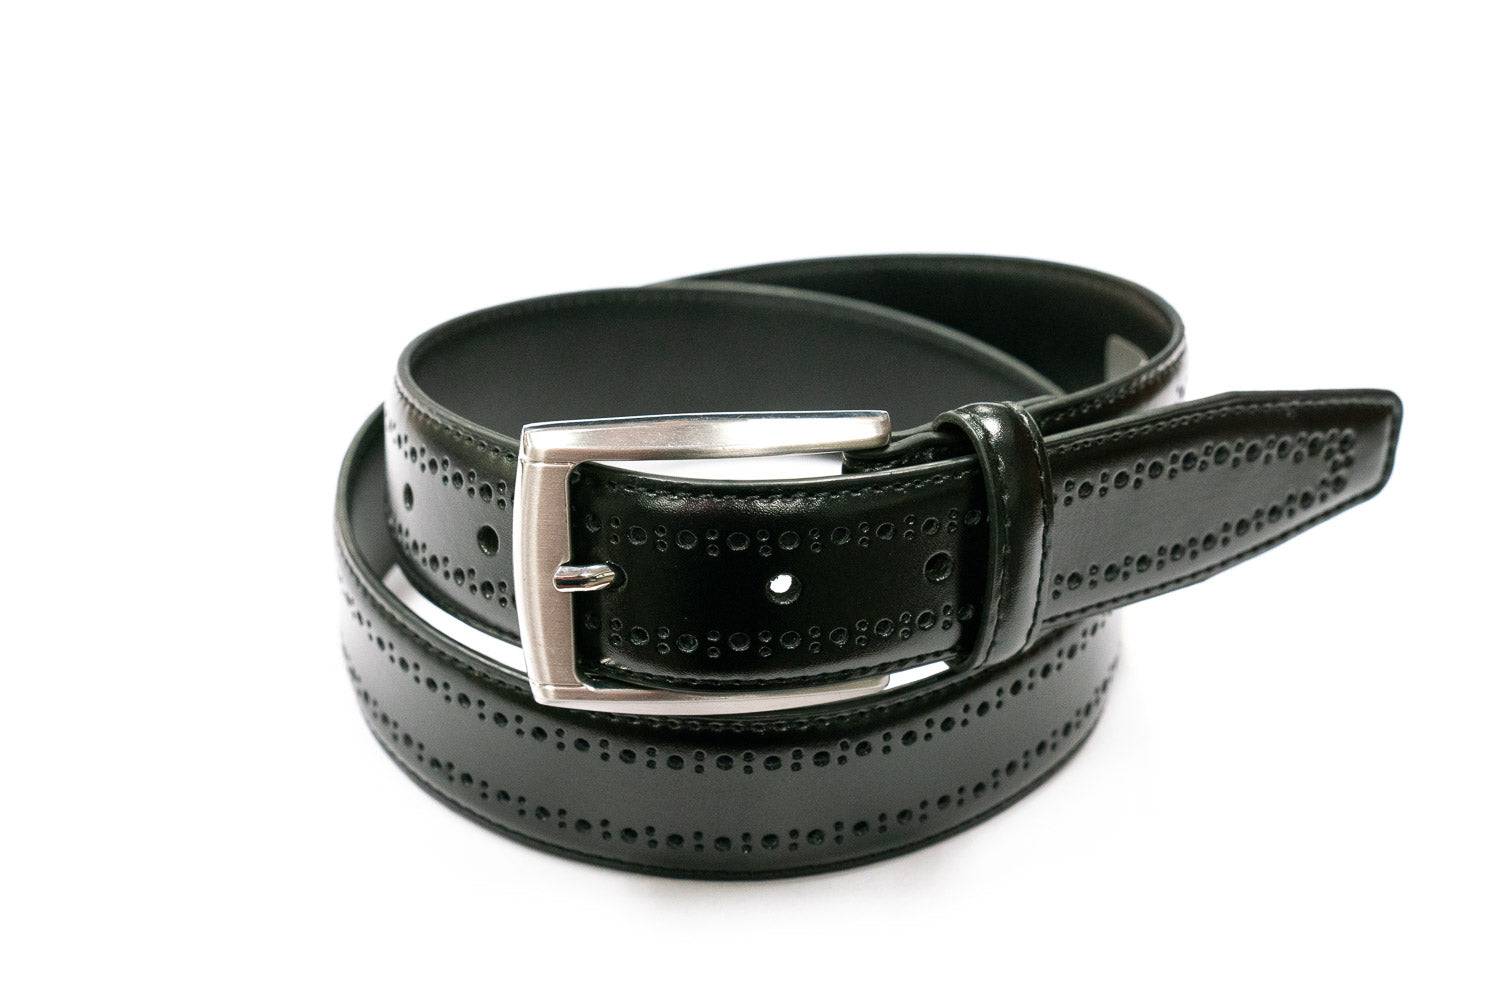 Perforated Black Leather Dress Belt - Rainwater's Men's Clothing and Tuxedo Rental